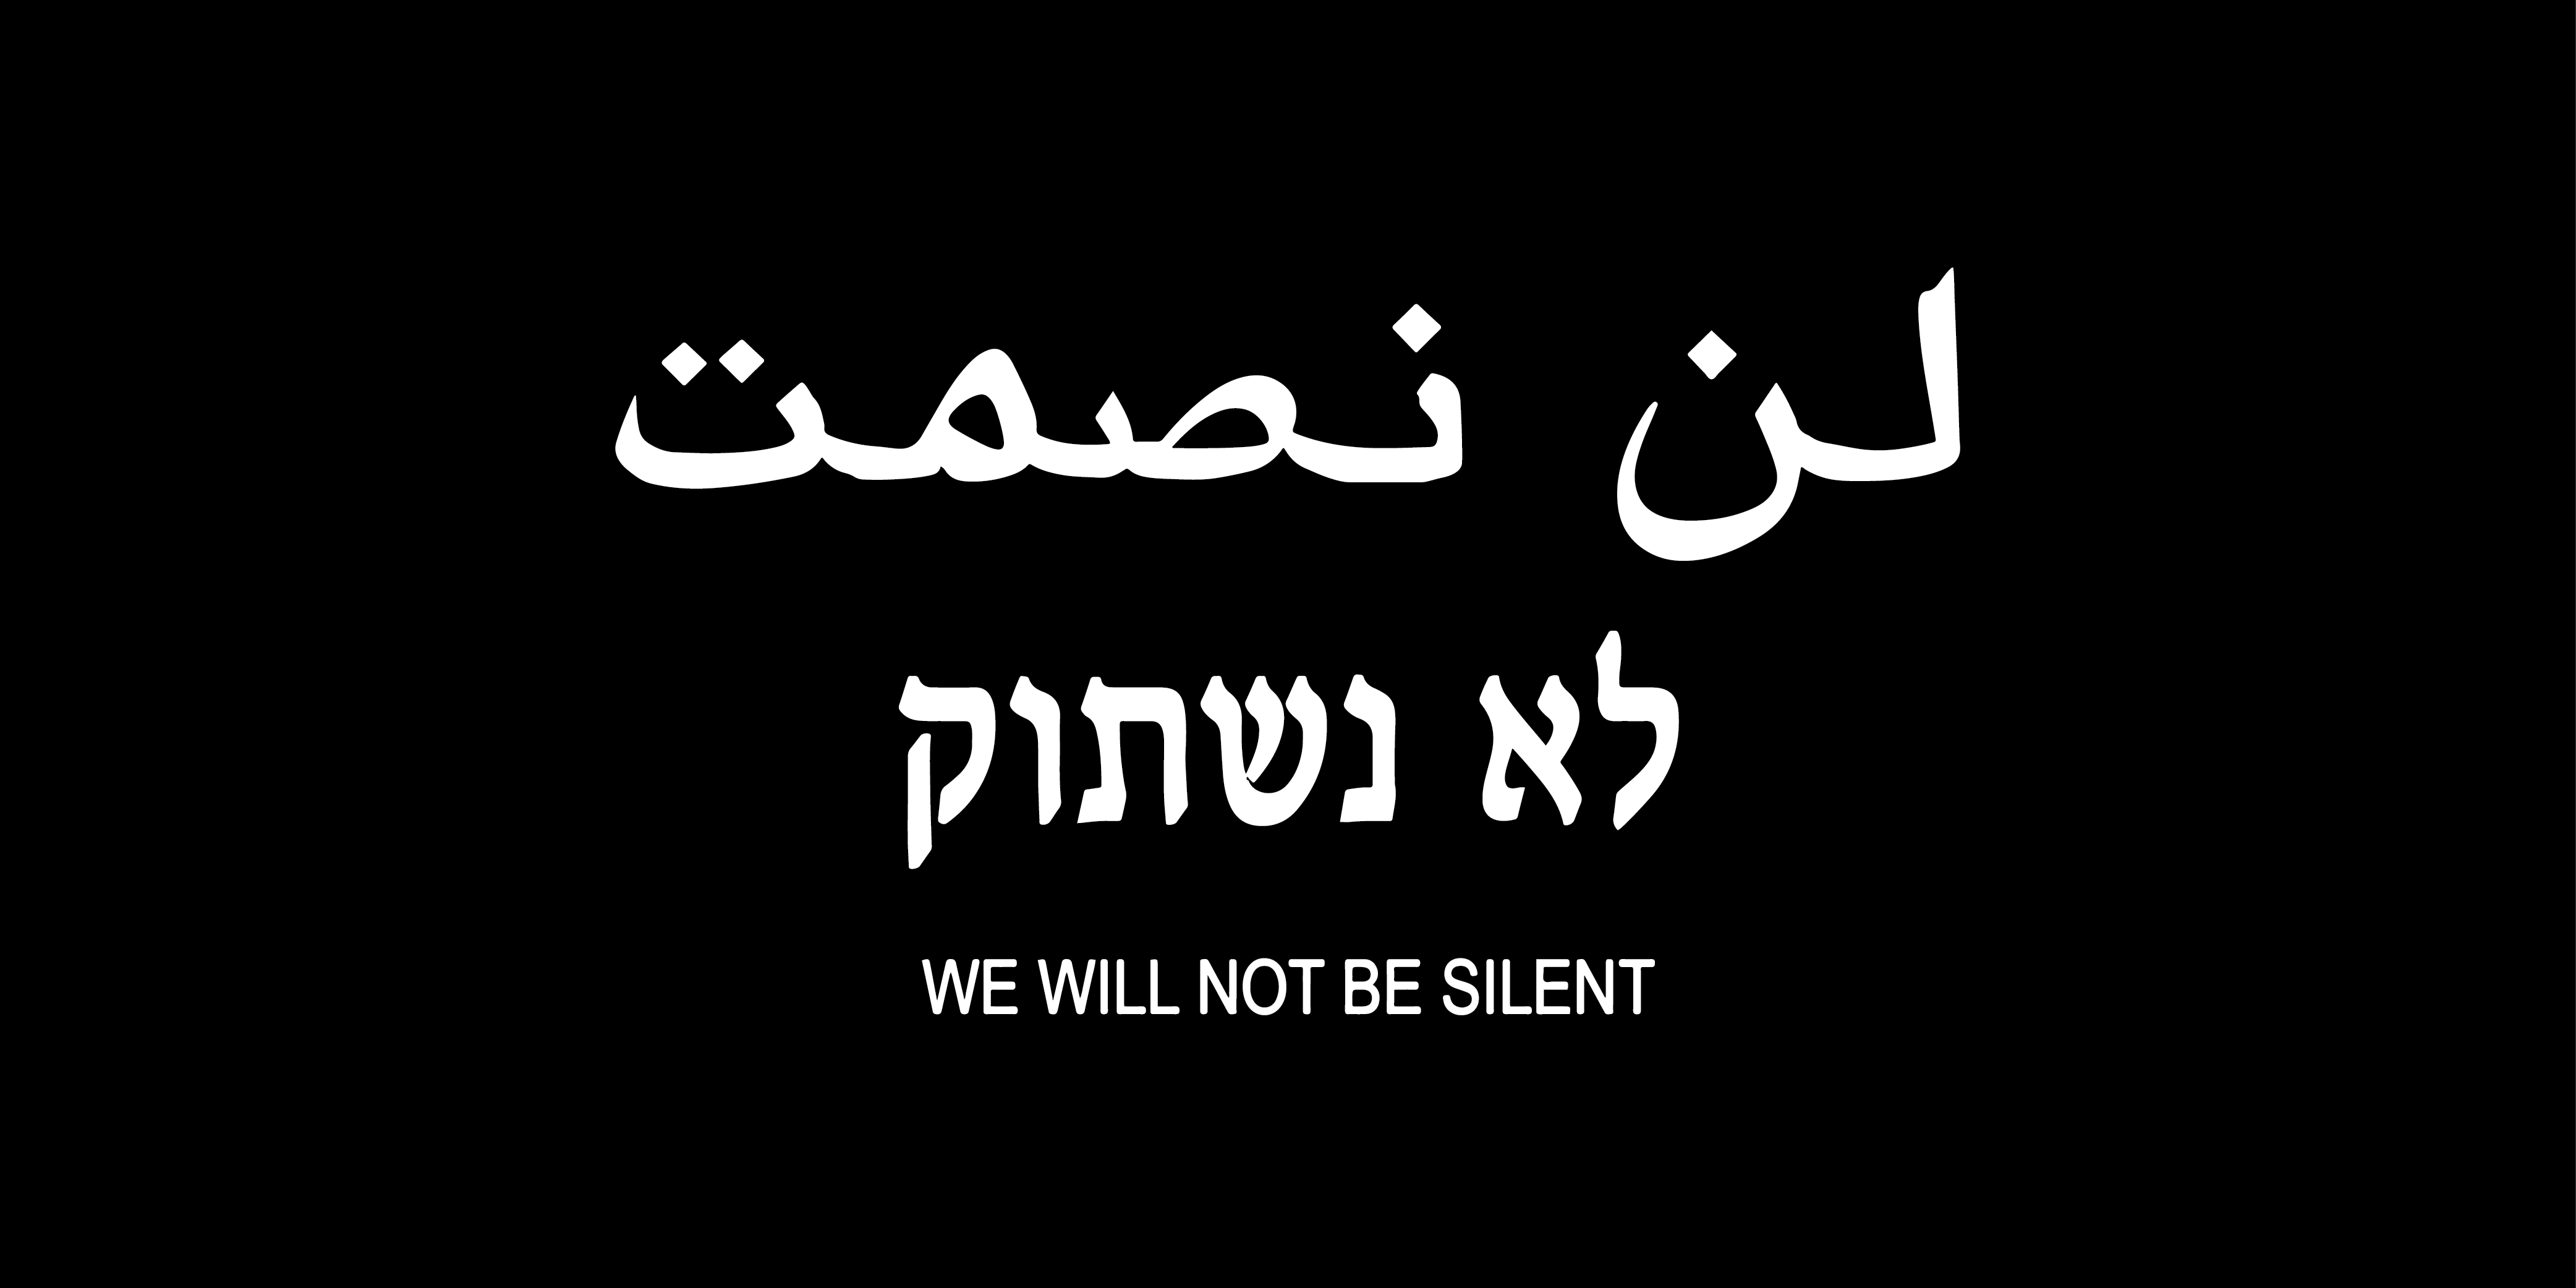 WE WILL NOT BE SILENT/ARABIC AND HEBREW